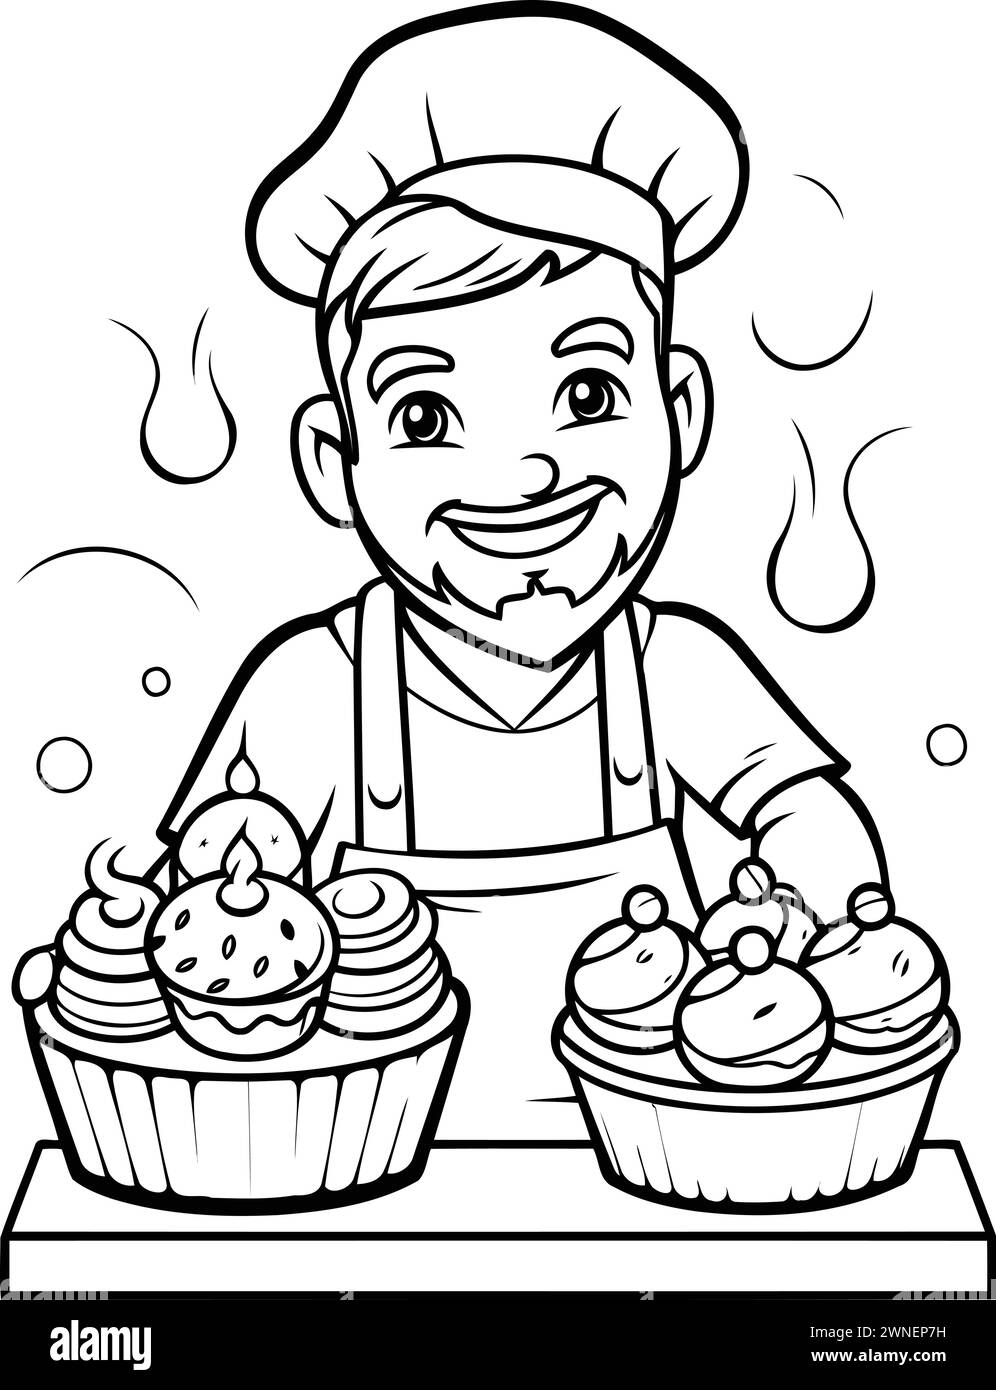 Black and White Cartoon Illustration of Happy Male Chef Character with Cupcakes for Coloring Book Stock Vector